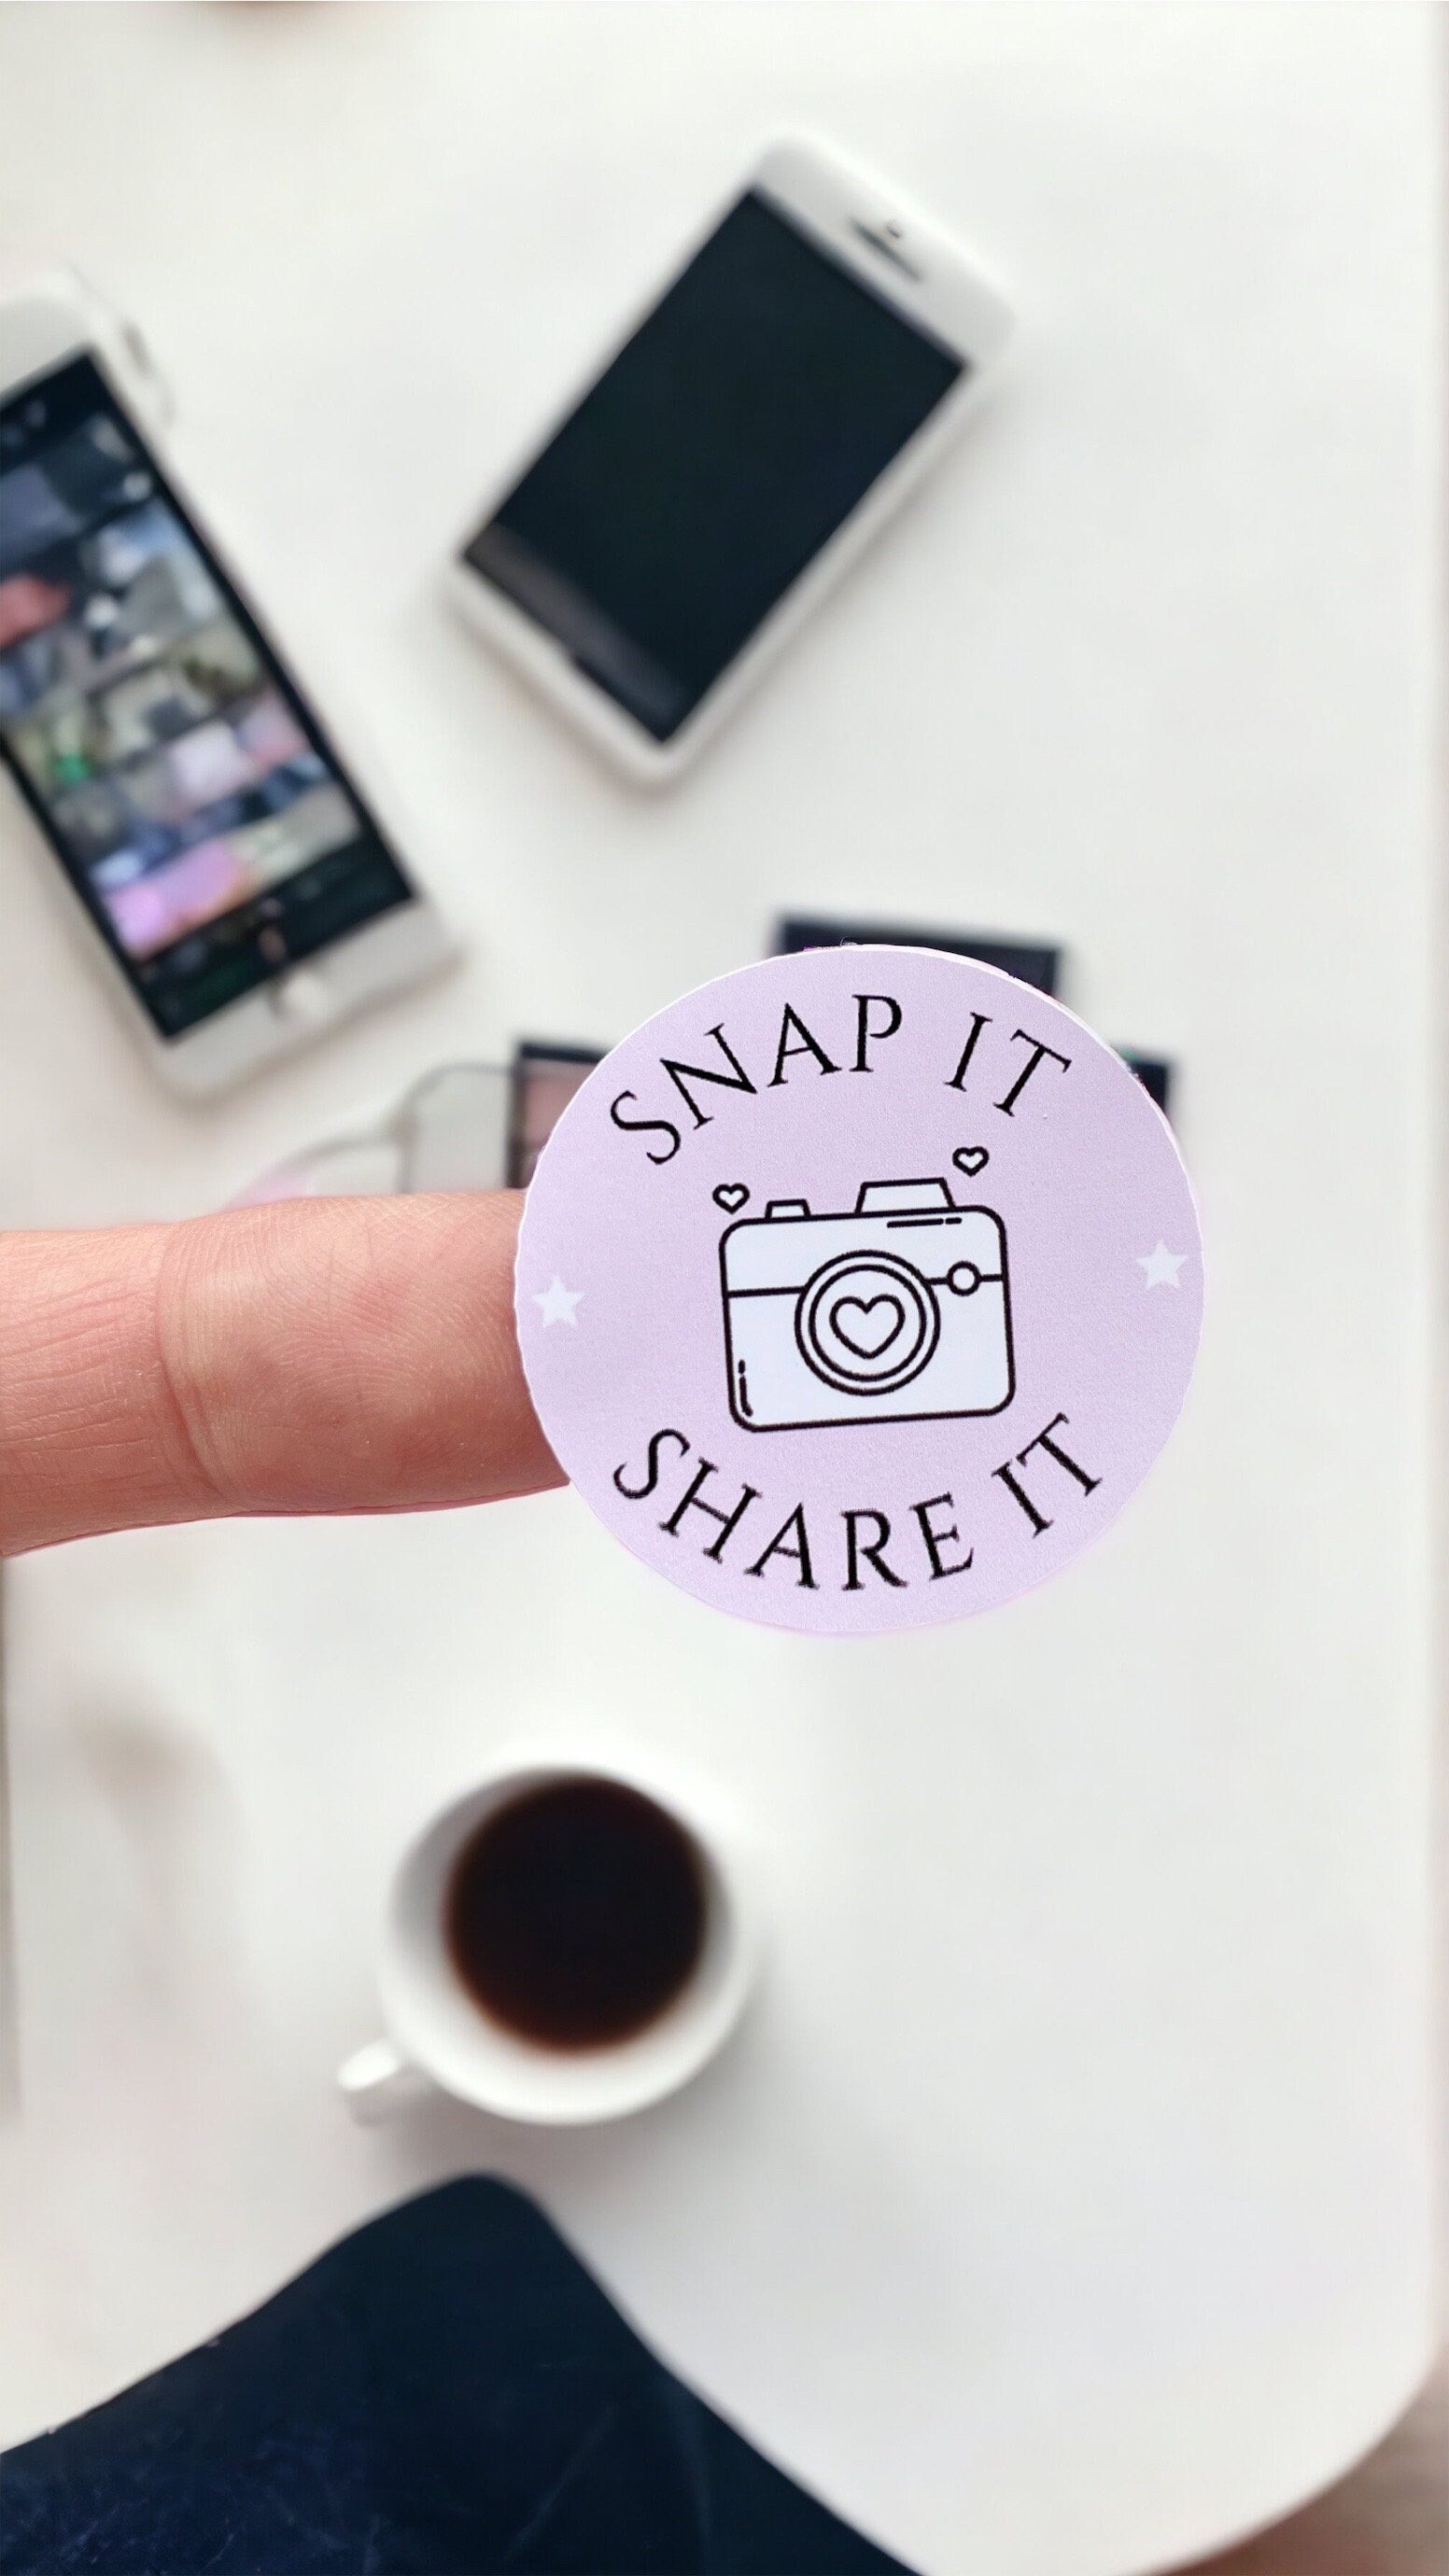 Snap it share it business thank you sticker | Wedding stickers social media